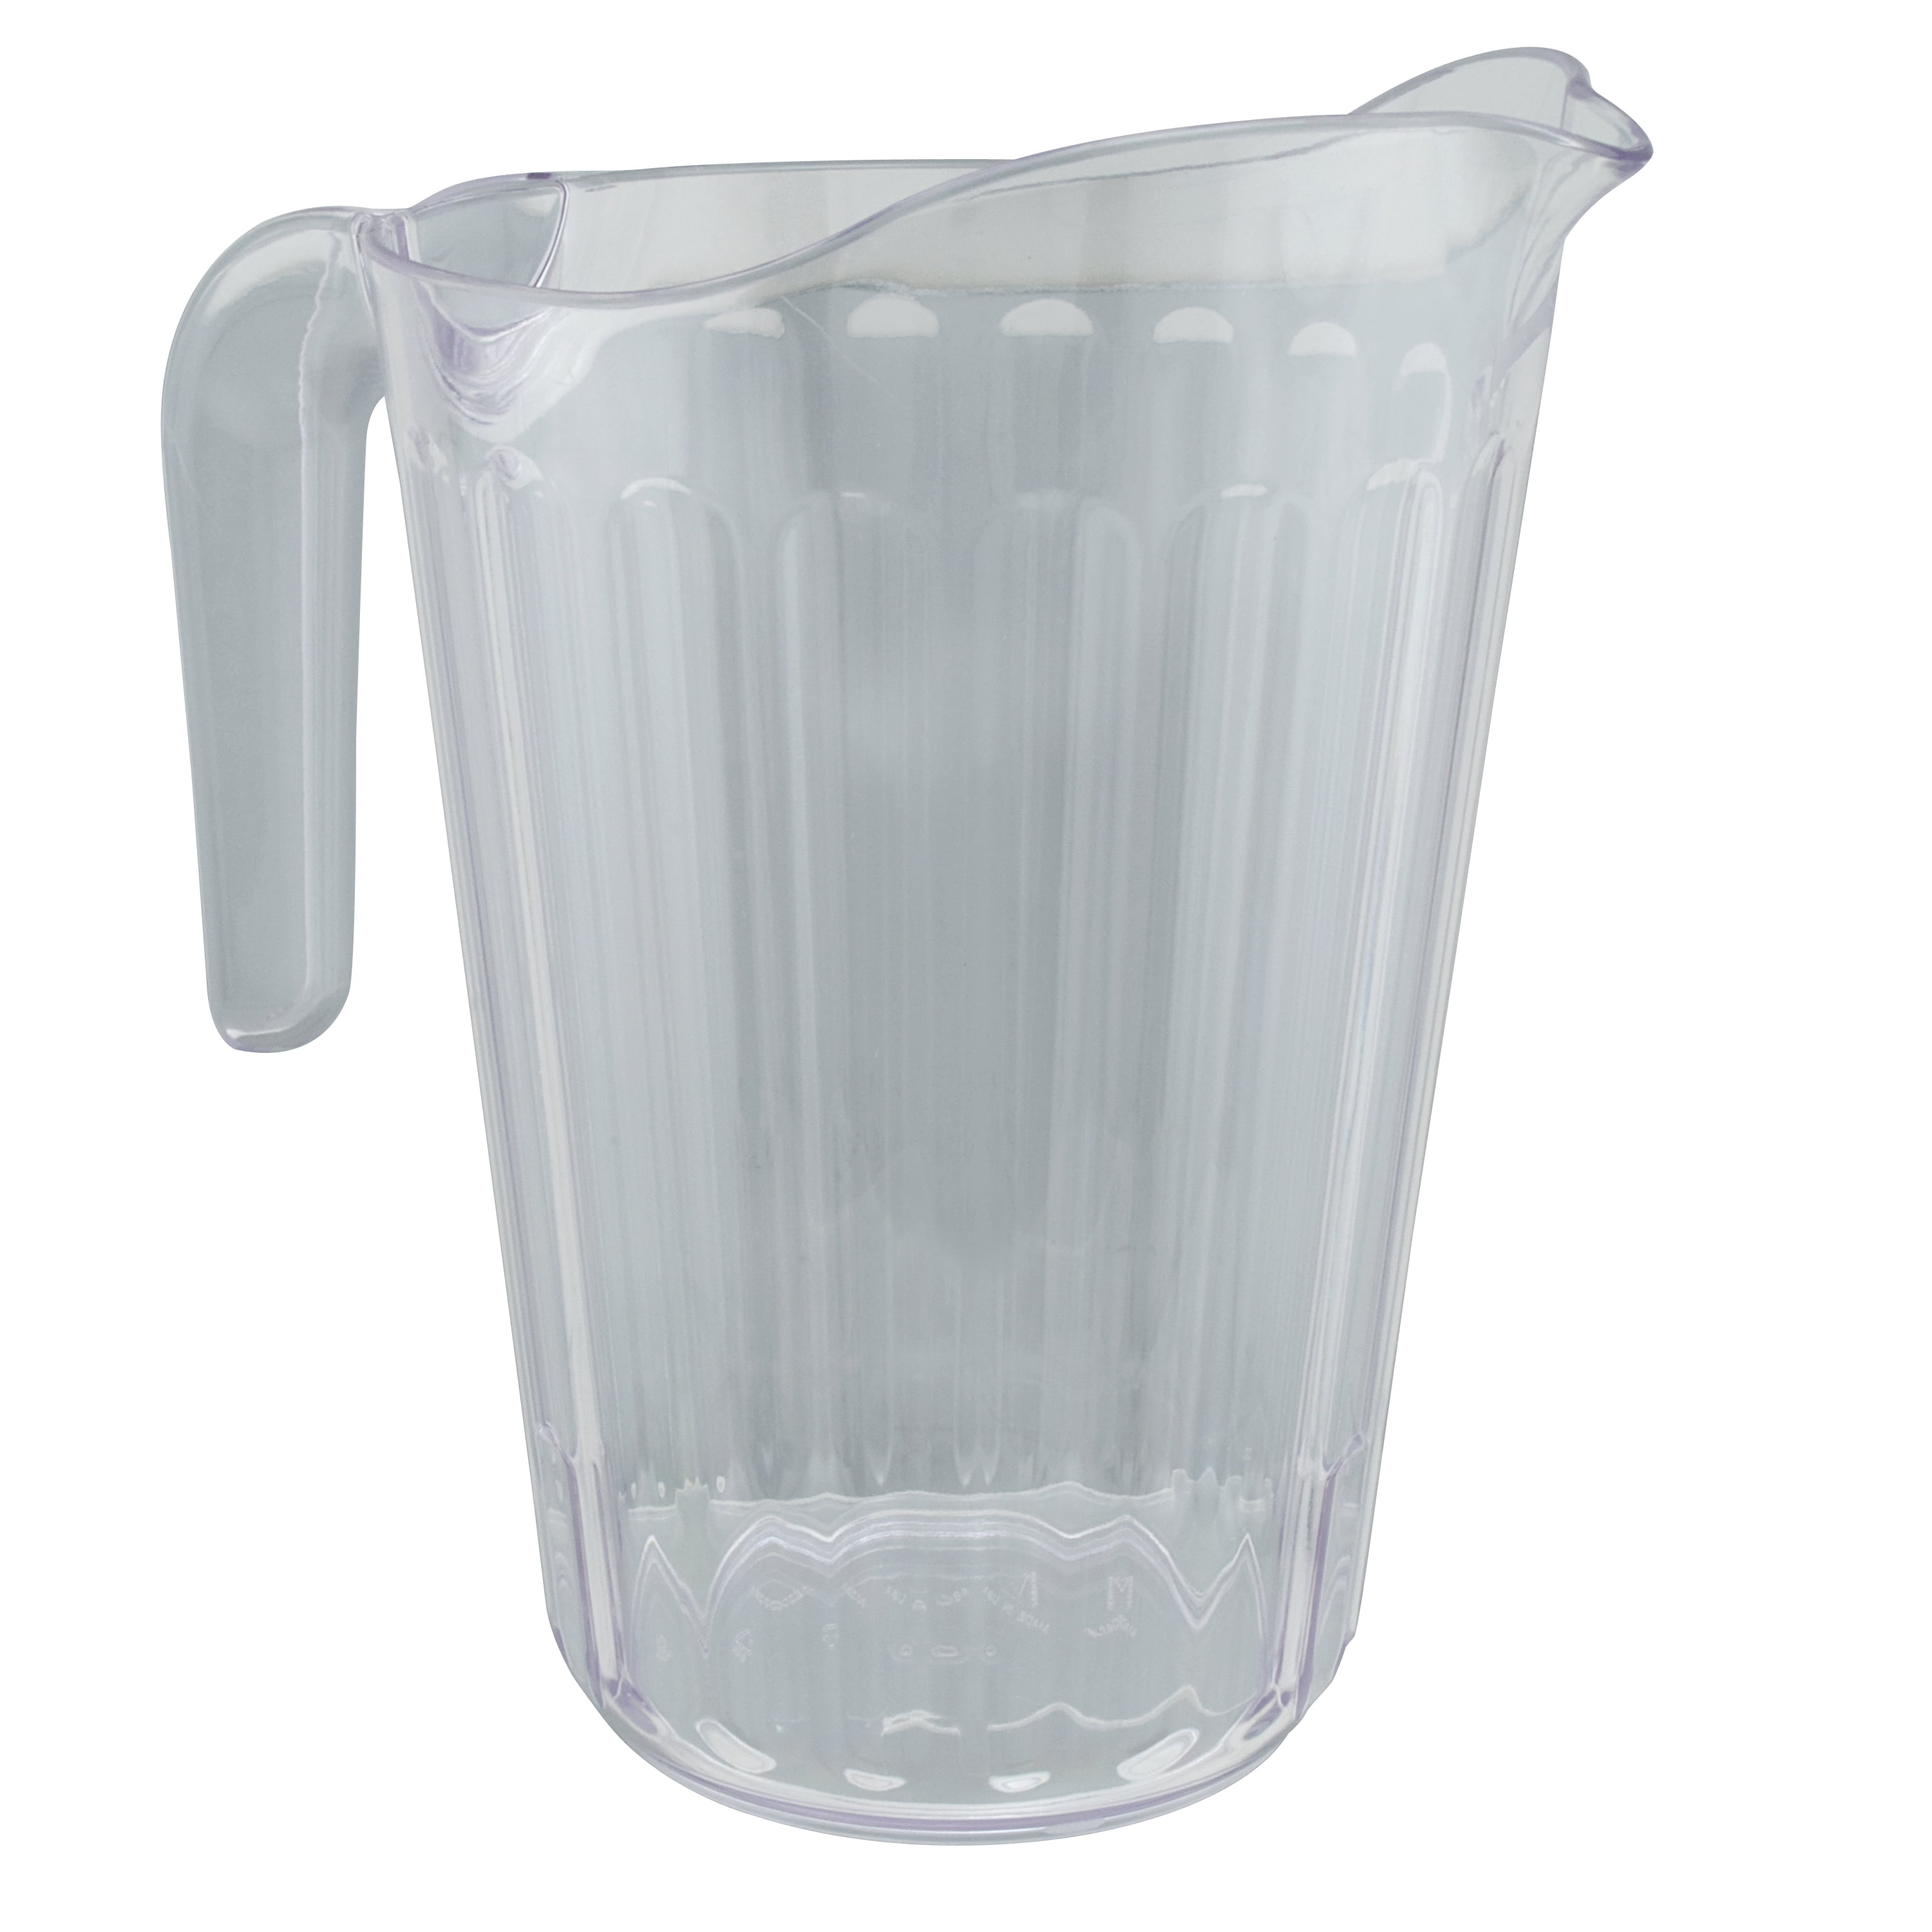 Metal Detectable Stackable Pouring Jug, Metal Detectable & X-Ray Visible, Food Factory Jug